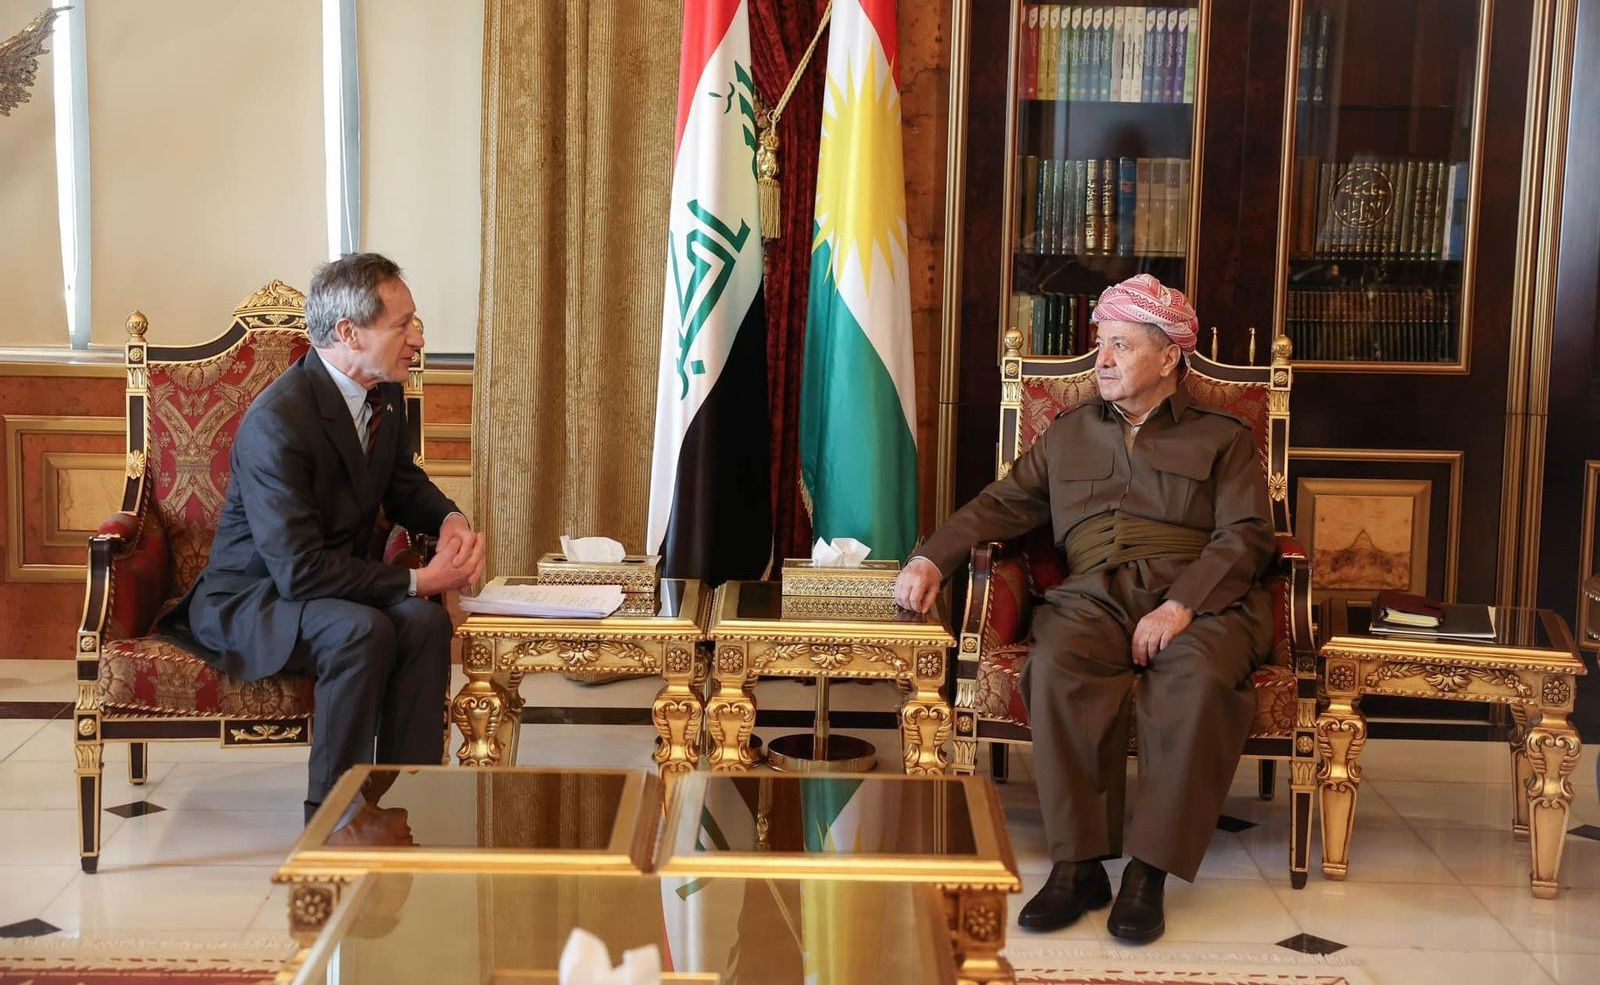 Leader Barzani thanks Paris for being a "vital friend" of the Kurdish people